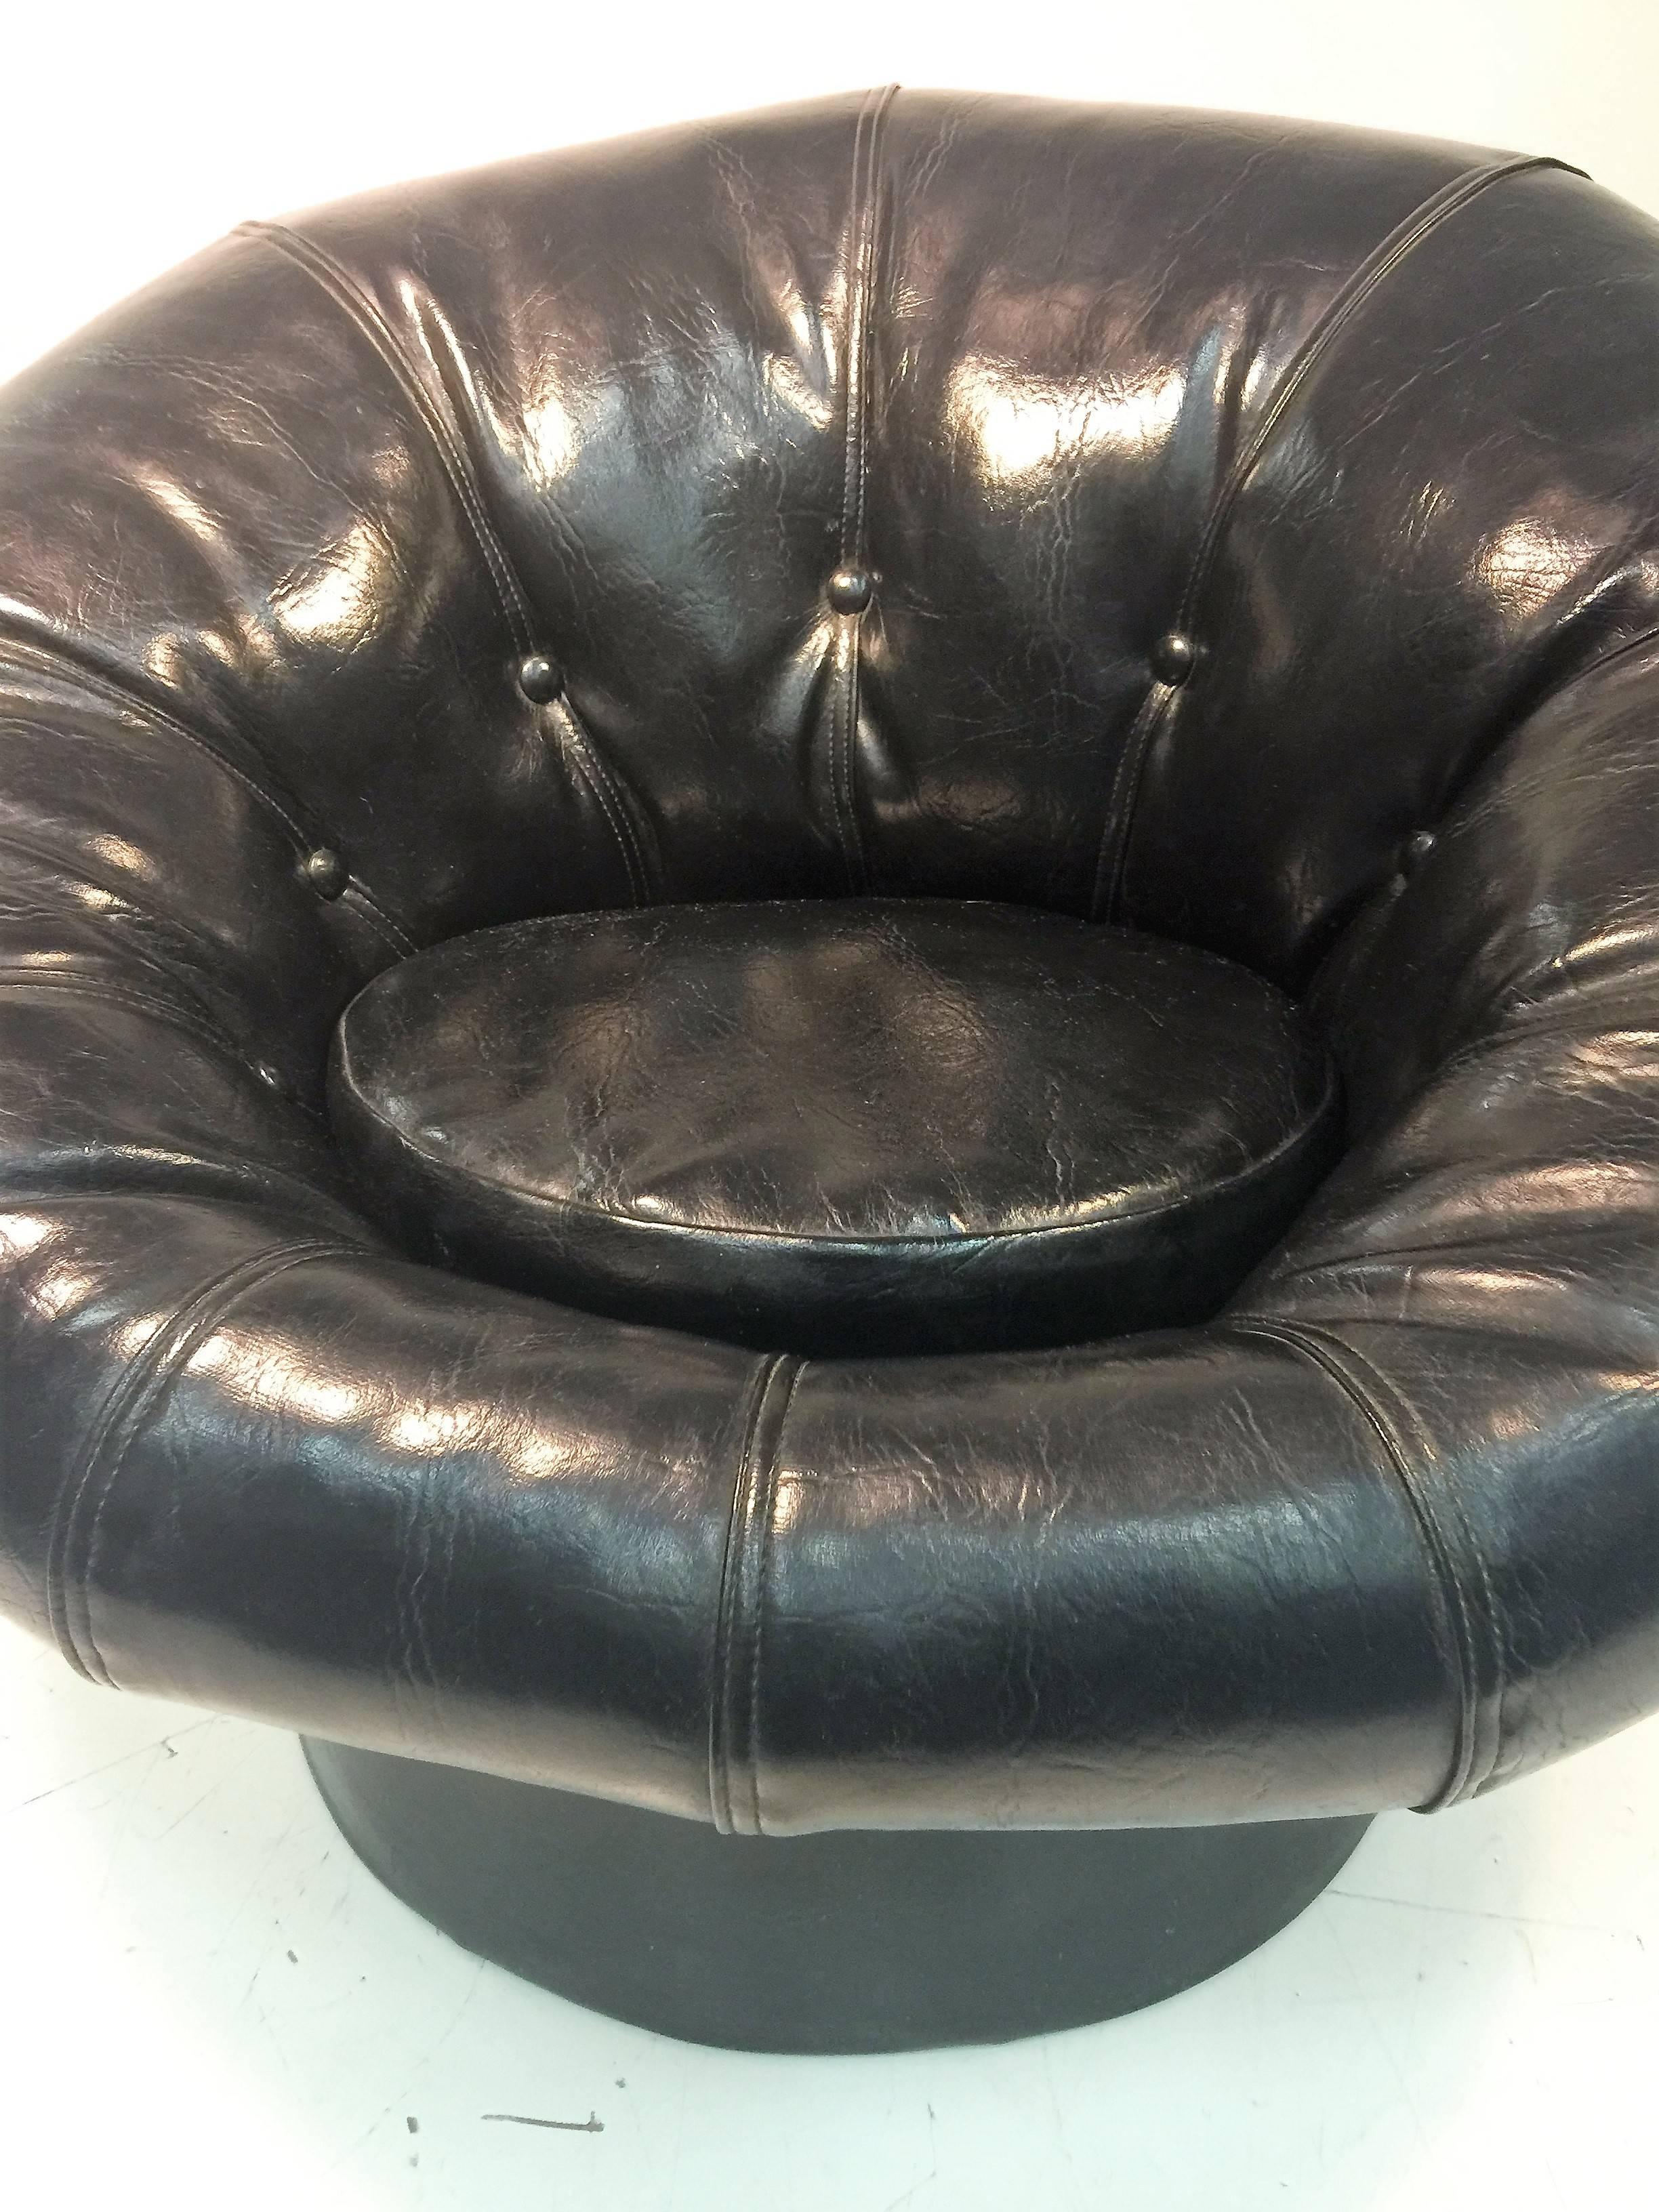 Mod Glossy Black Leatherette and Fiberglass Pouf Chair in Style of Joe Colombo In Excellent Condition For Sale In Mount Penn, PA